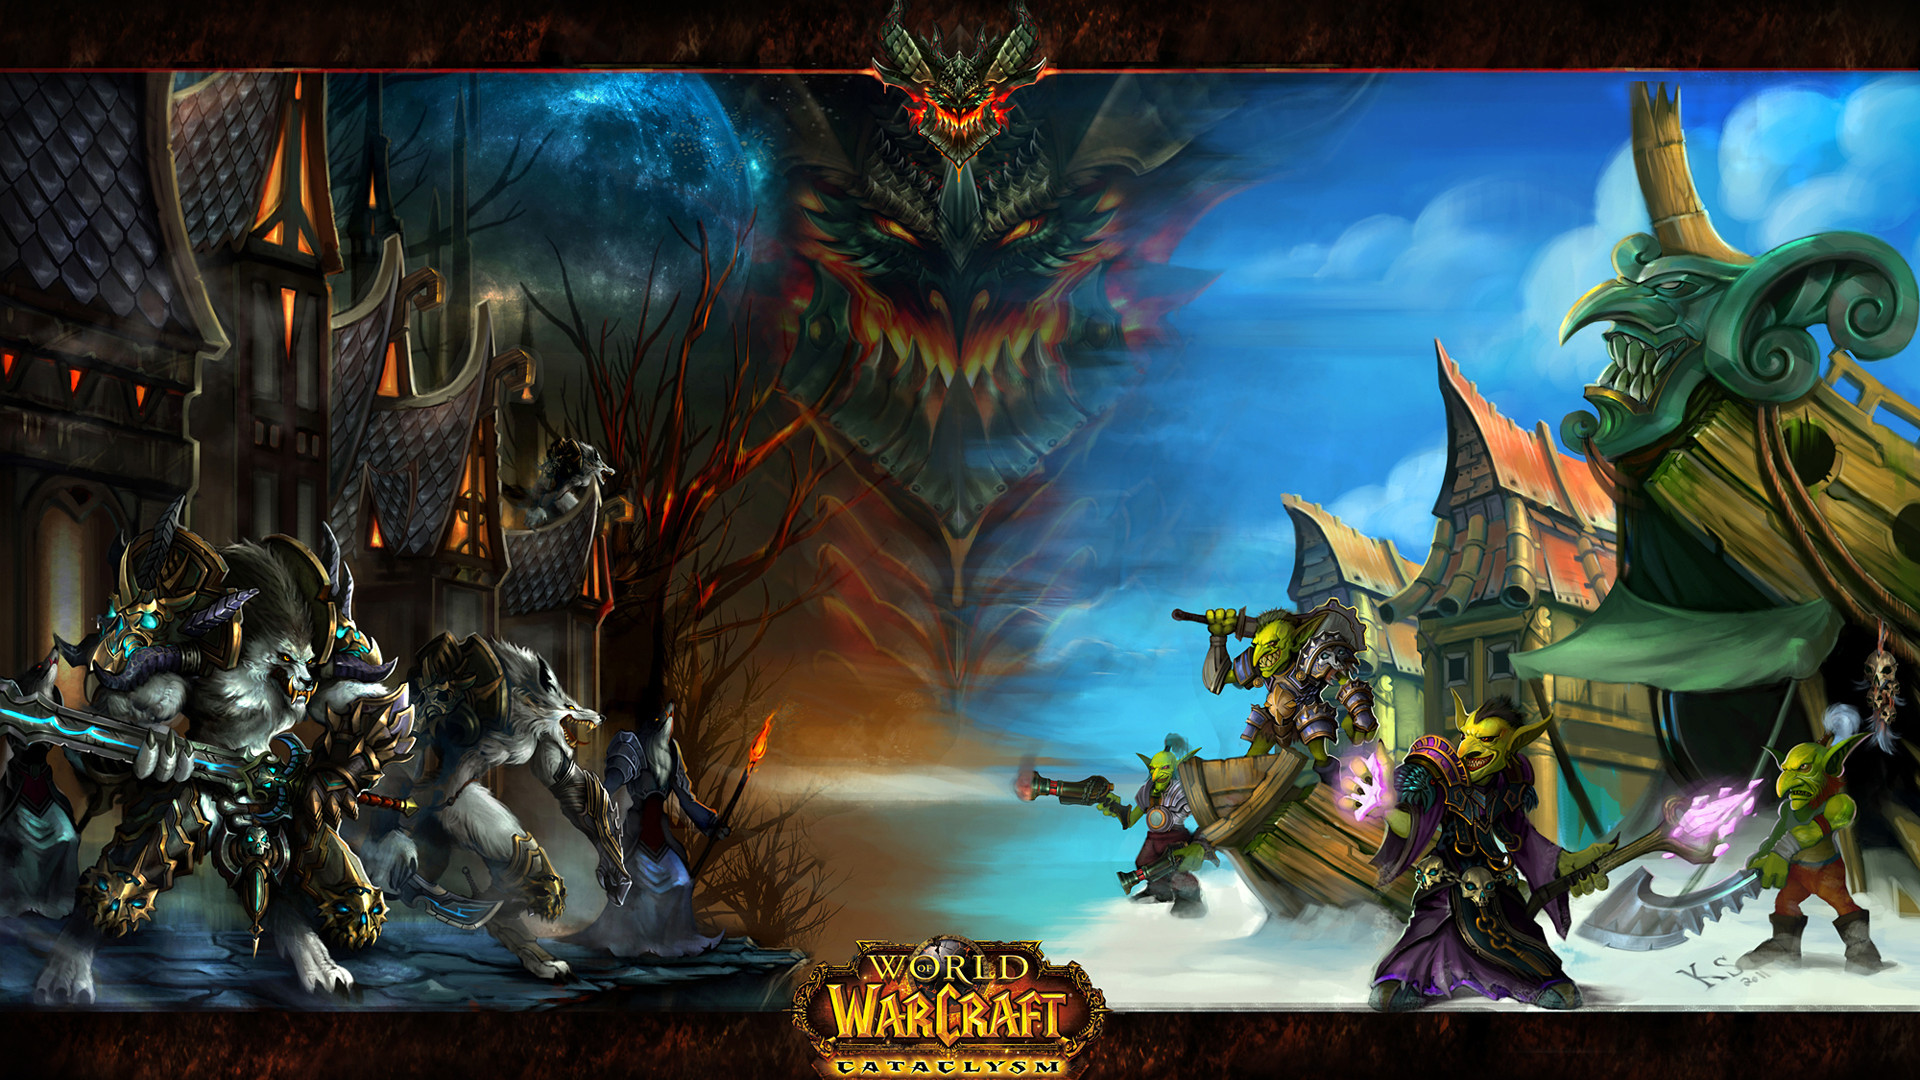 1920x1080 images of world of warcraft goblins | Wallpaper world of warcraft  cataclysm, goblins, Worgen